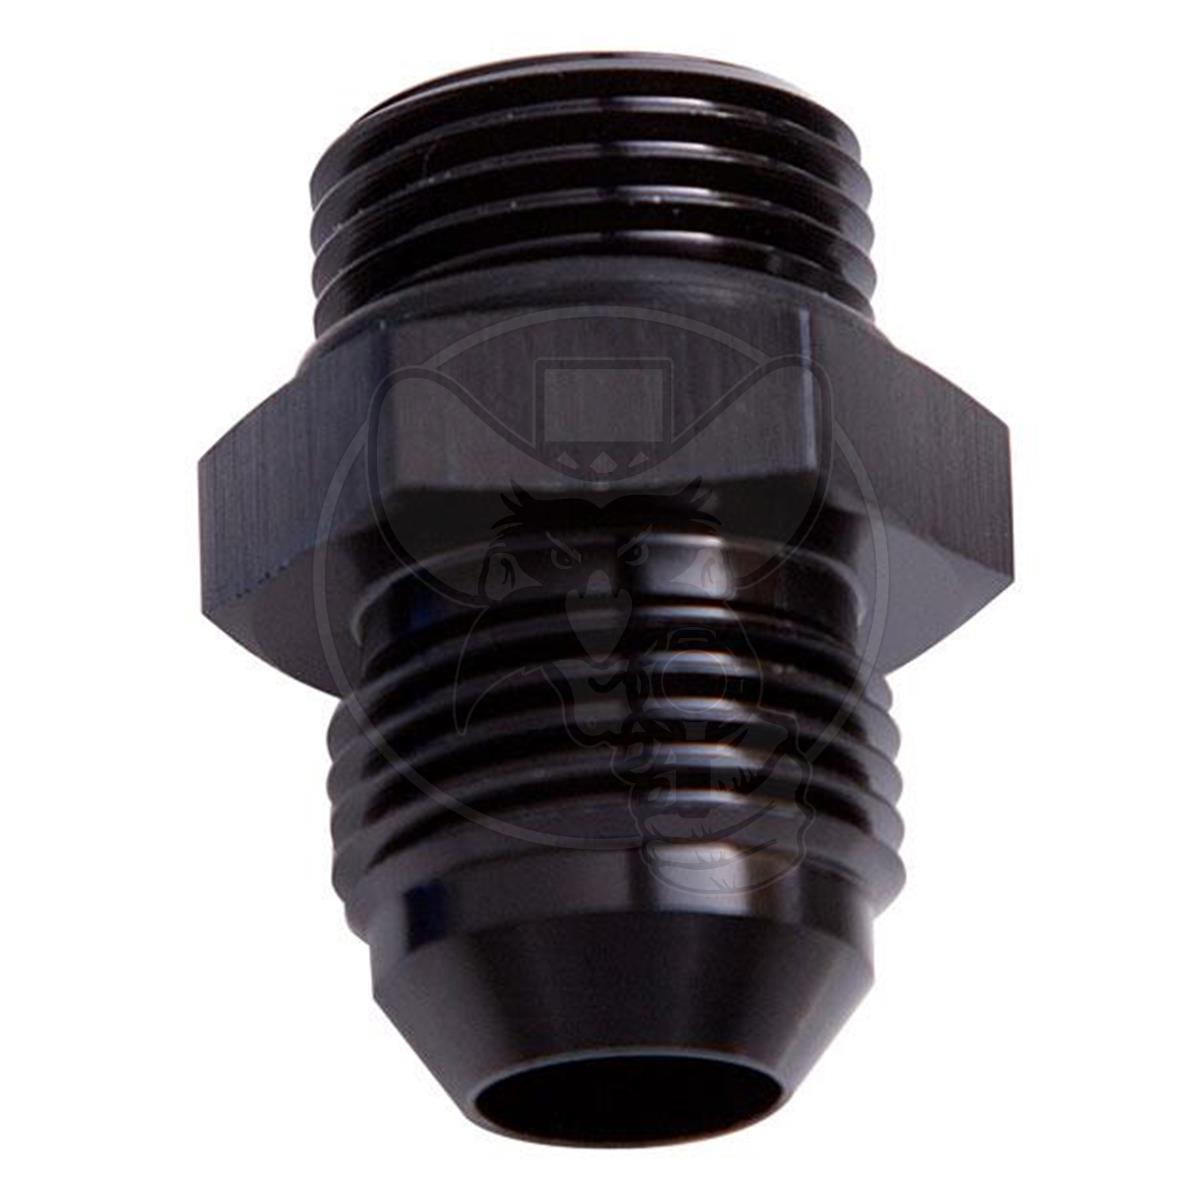 Aeroflow -10 ORB to -6AN Straight Male Flare Adapter - Black